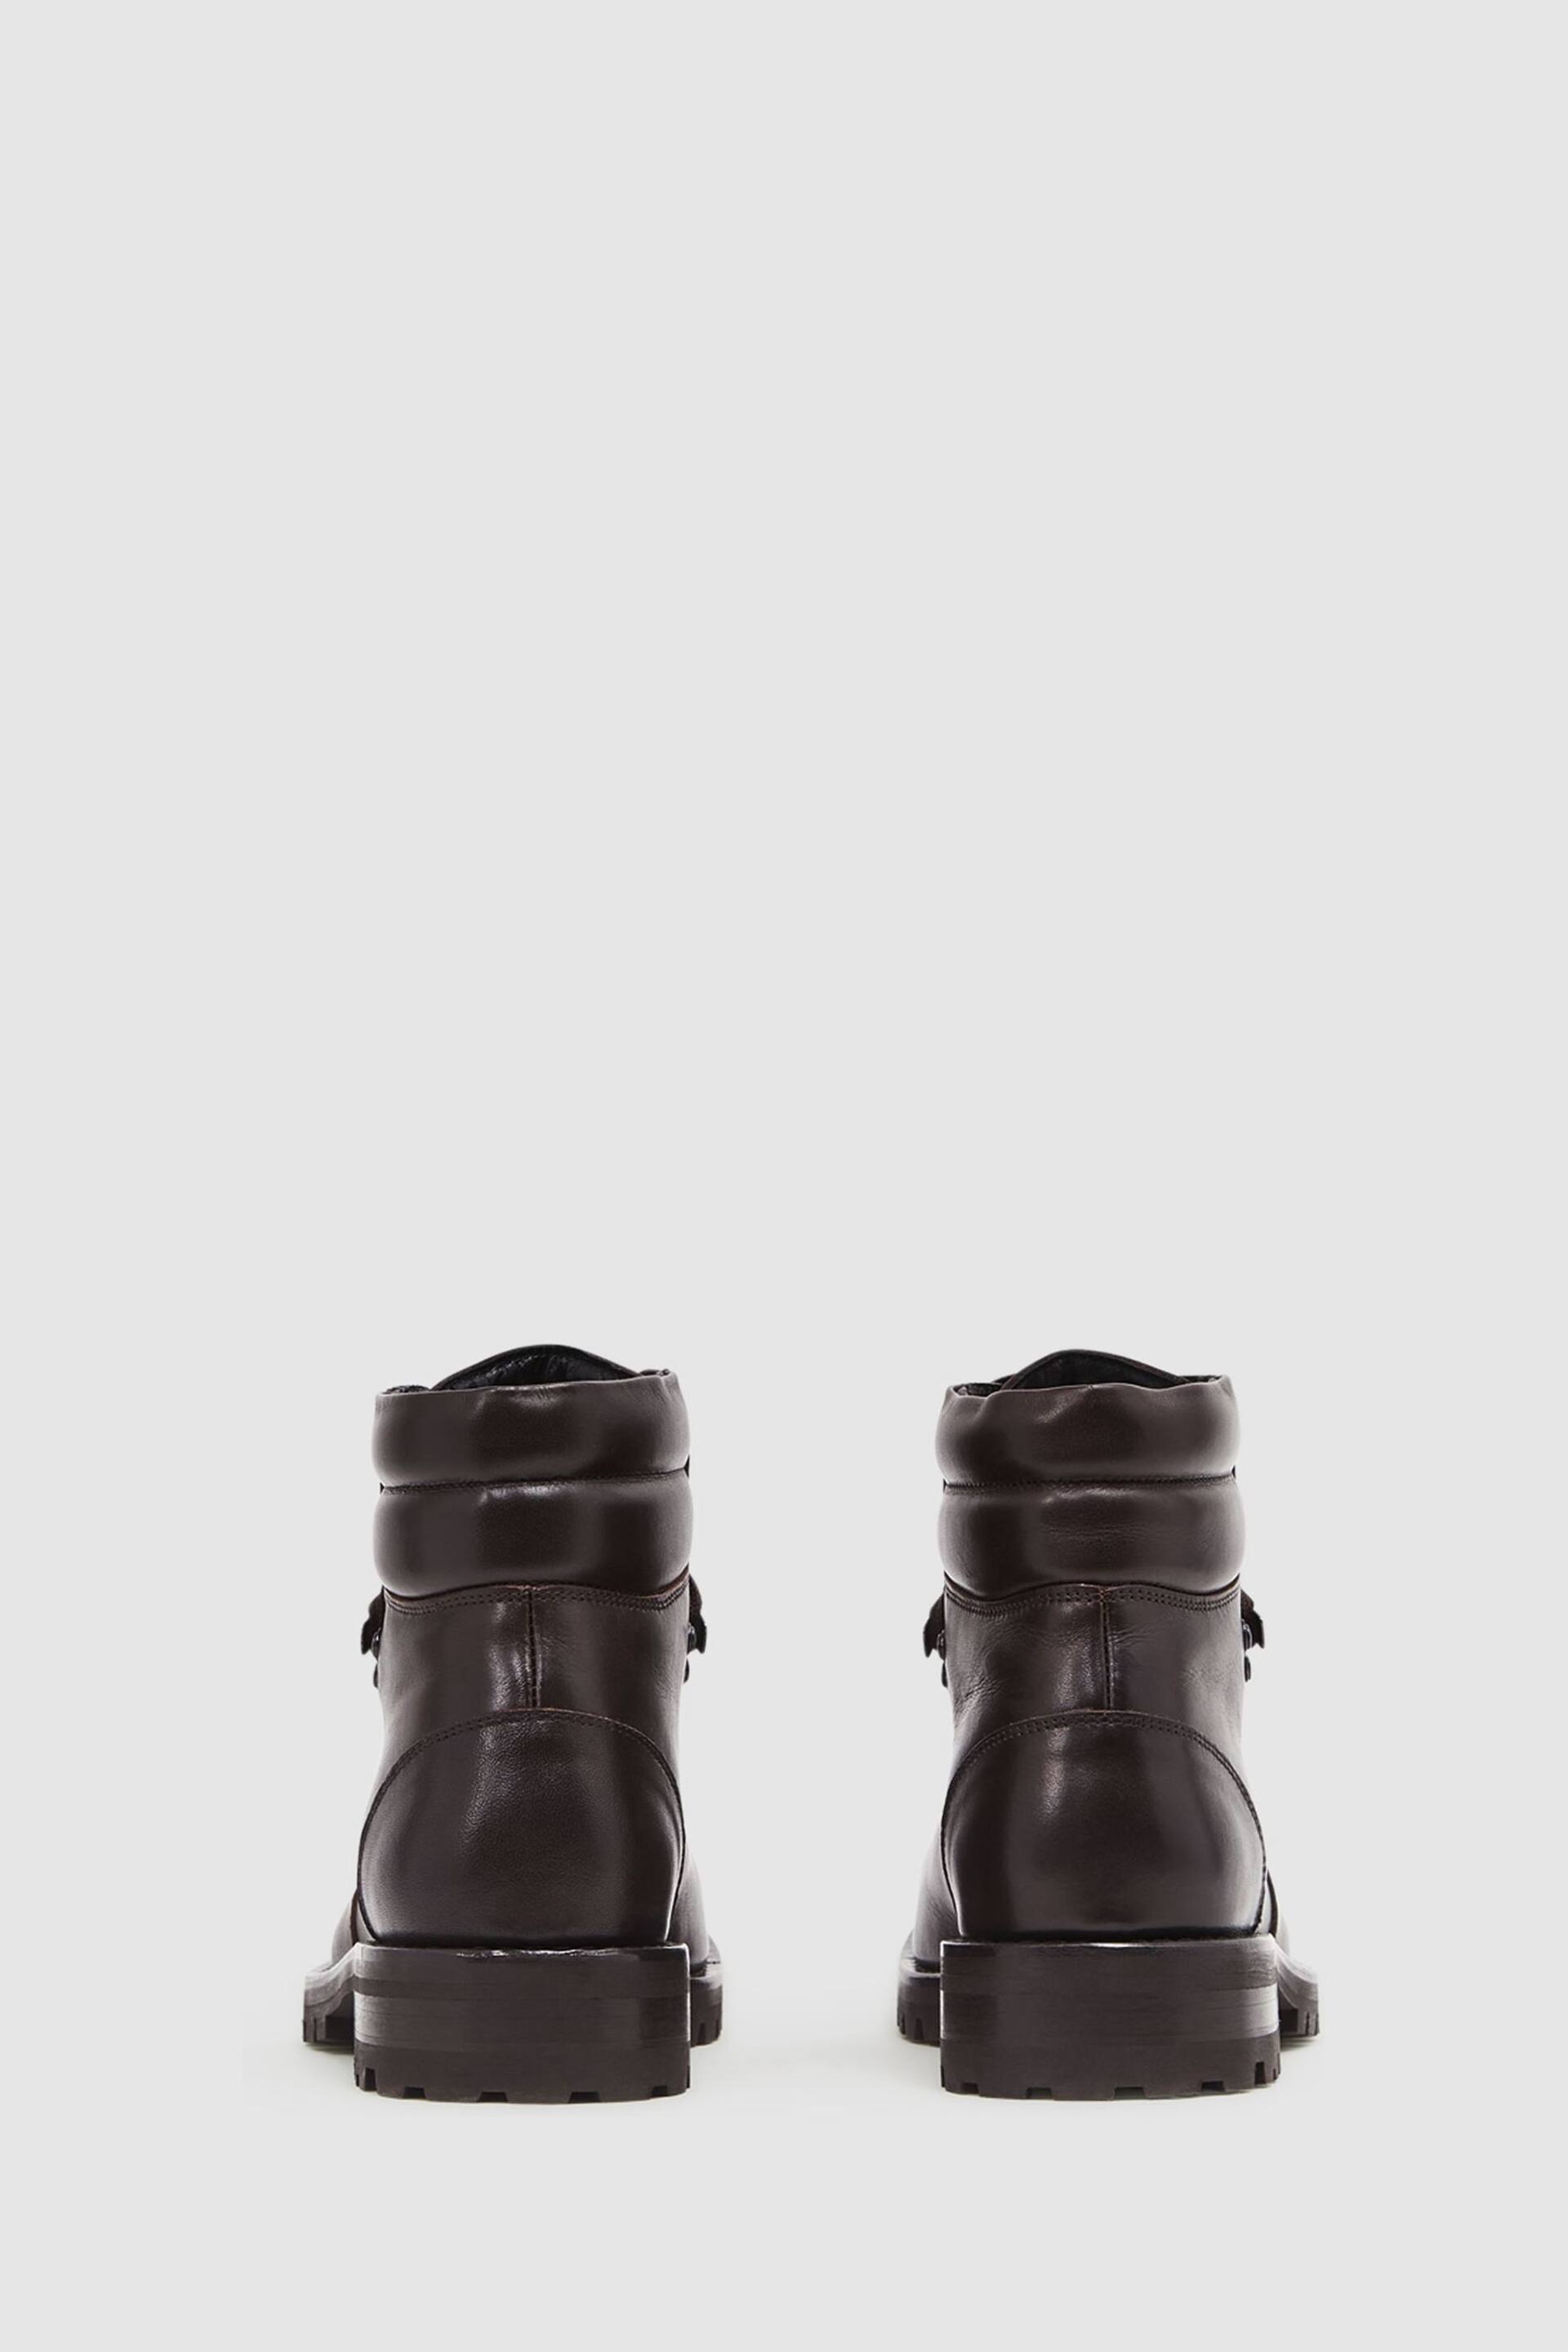 Reiss Dark Brown Amwell Leather Hiking Boots - Image 6 of 8